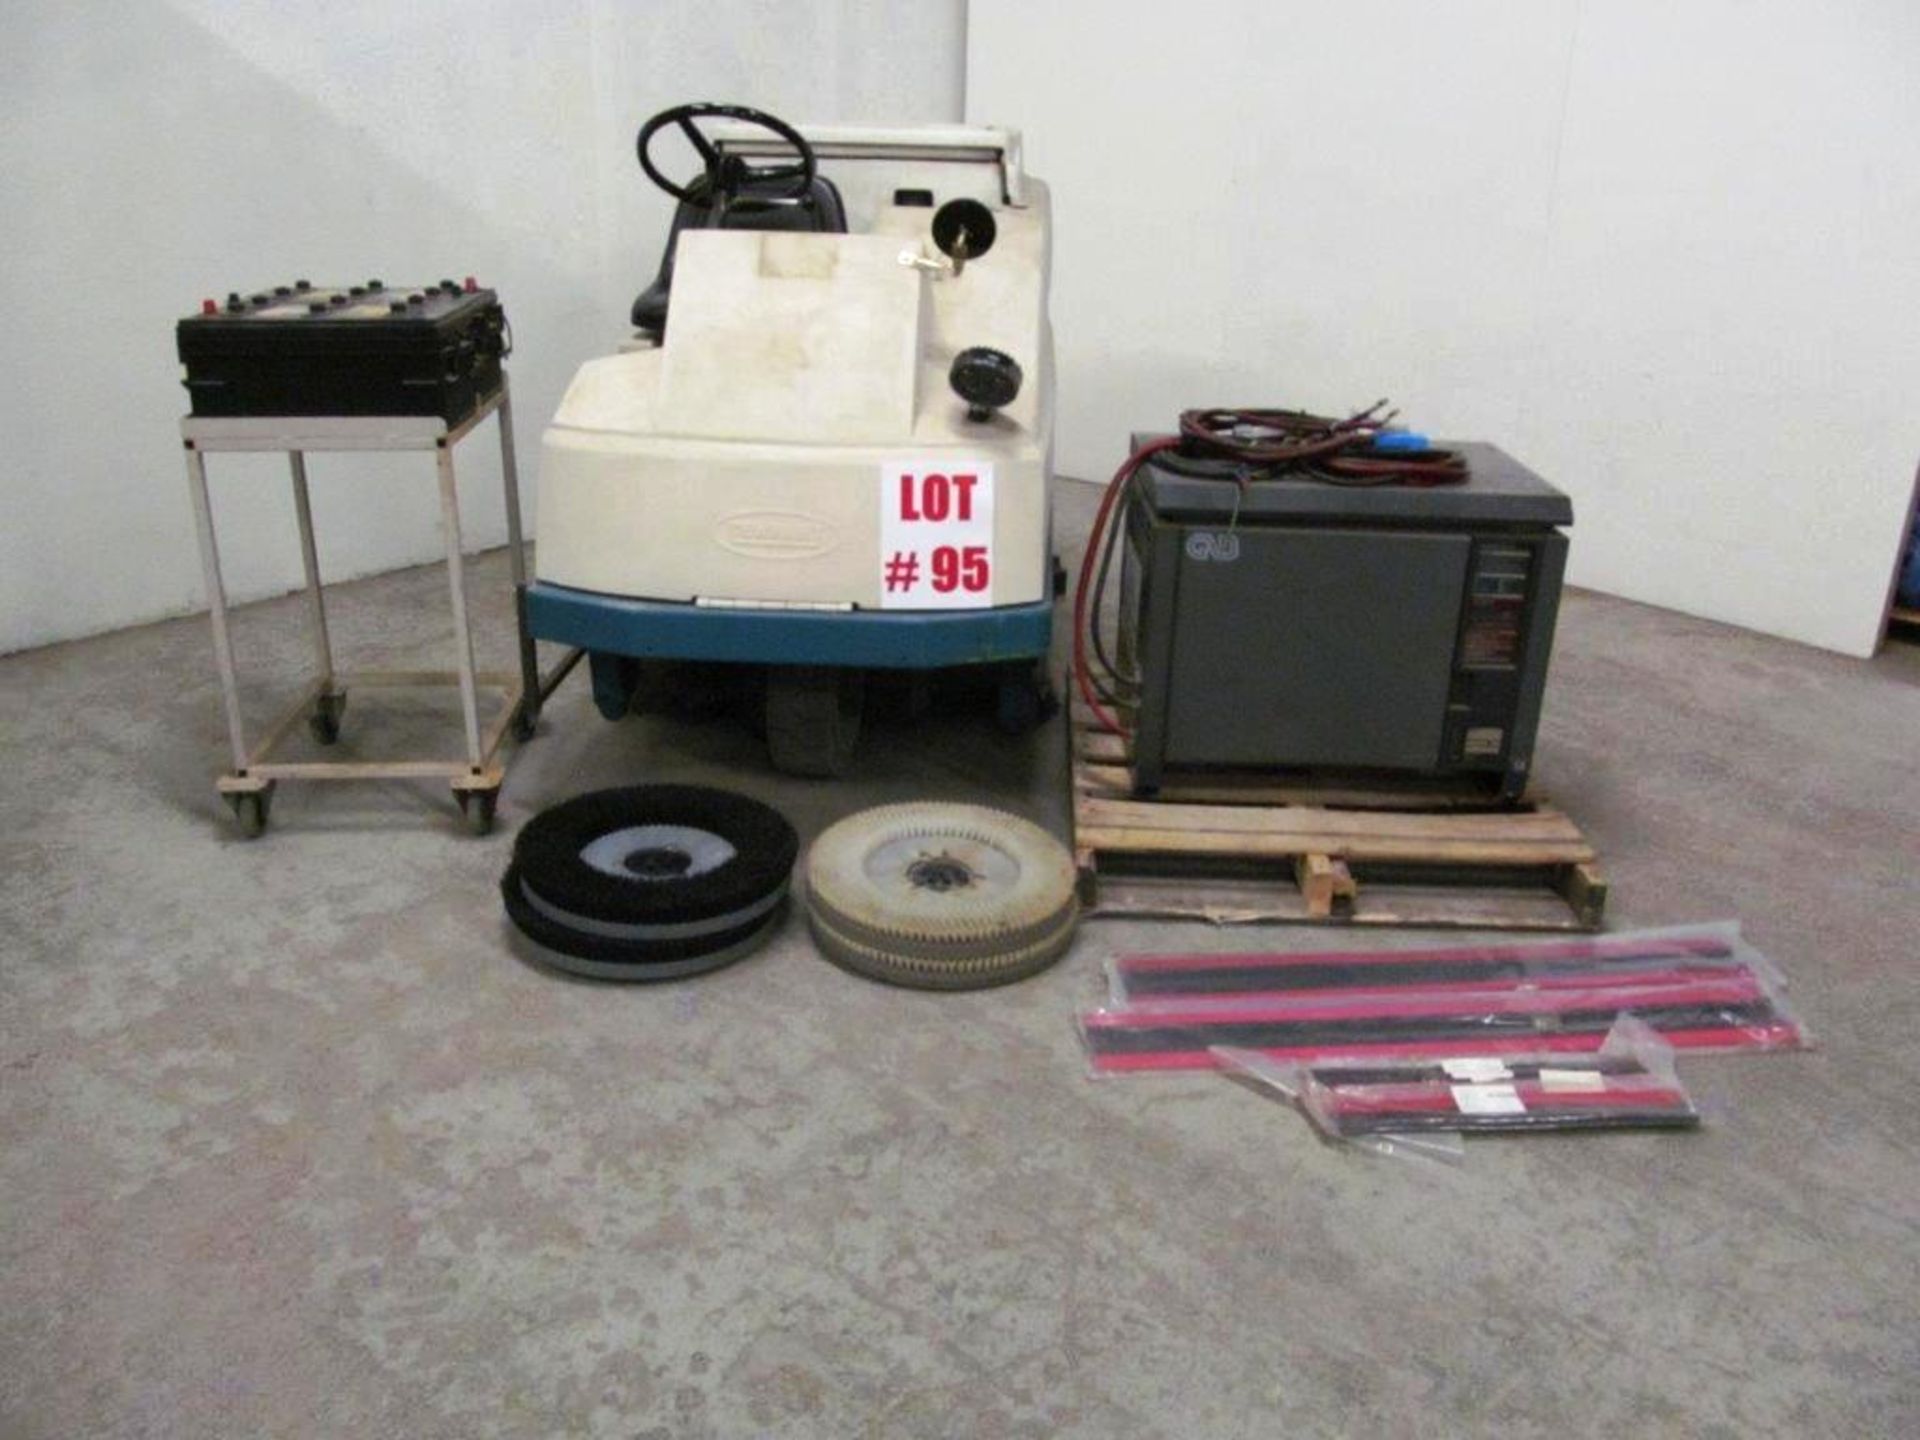 TENNANT FLOOR SWEEPER, ELECTRIC 36V, C/W EXTRA BATTERIES & ACCESSORIES, CONDITION UNKNOWN - Image 2 of 8